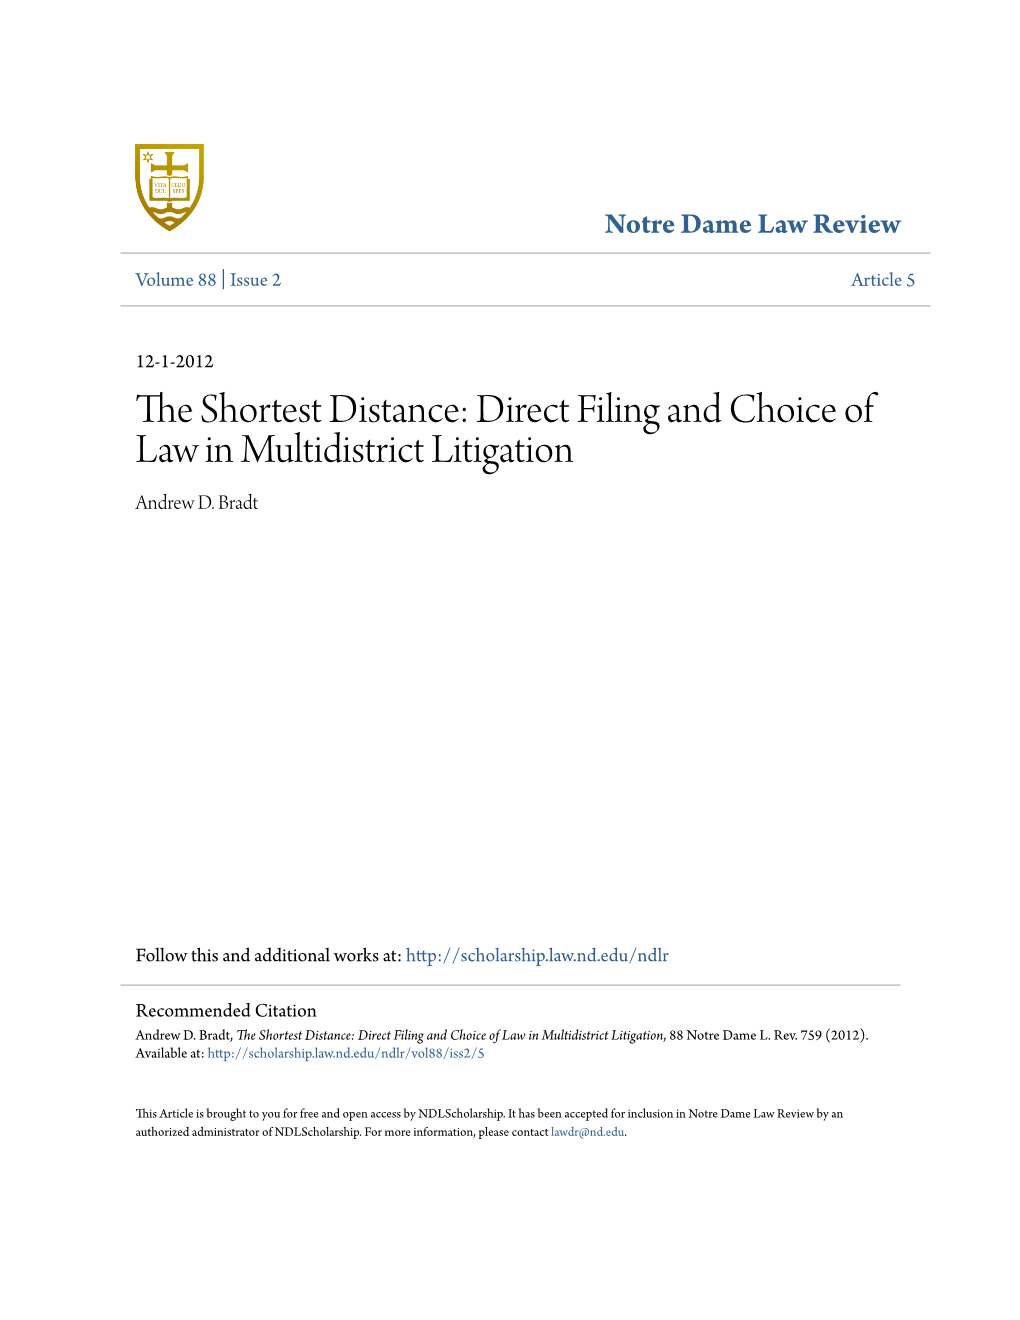 Direct Filing and Choice of Law in Multidistrict Litigation Andrew D